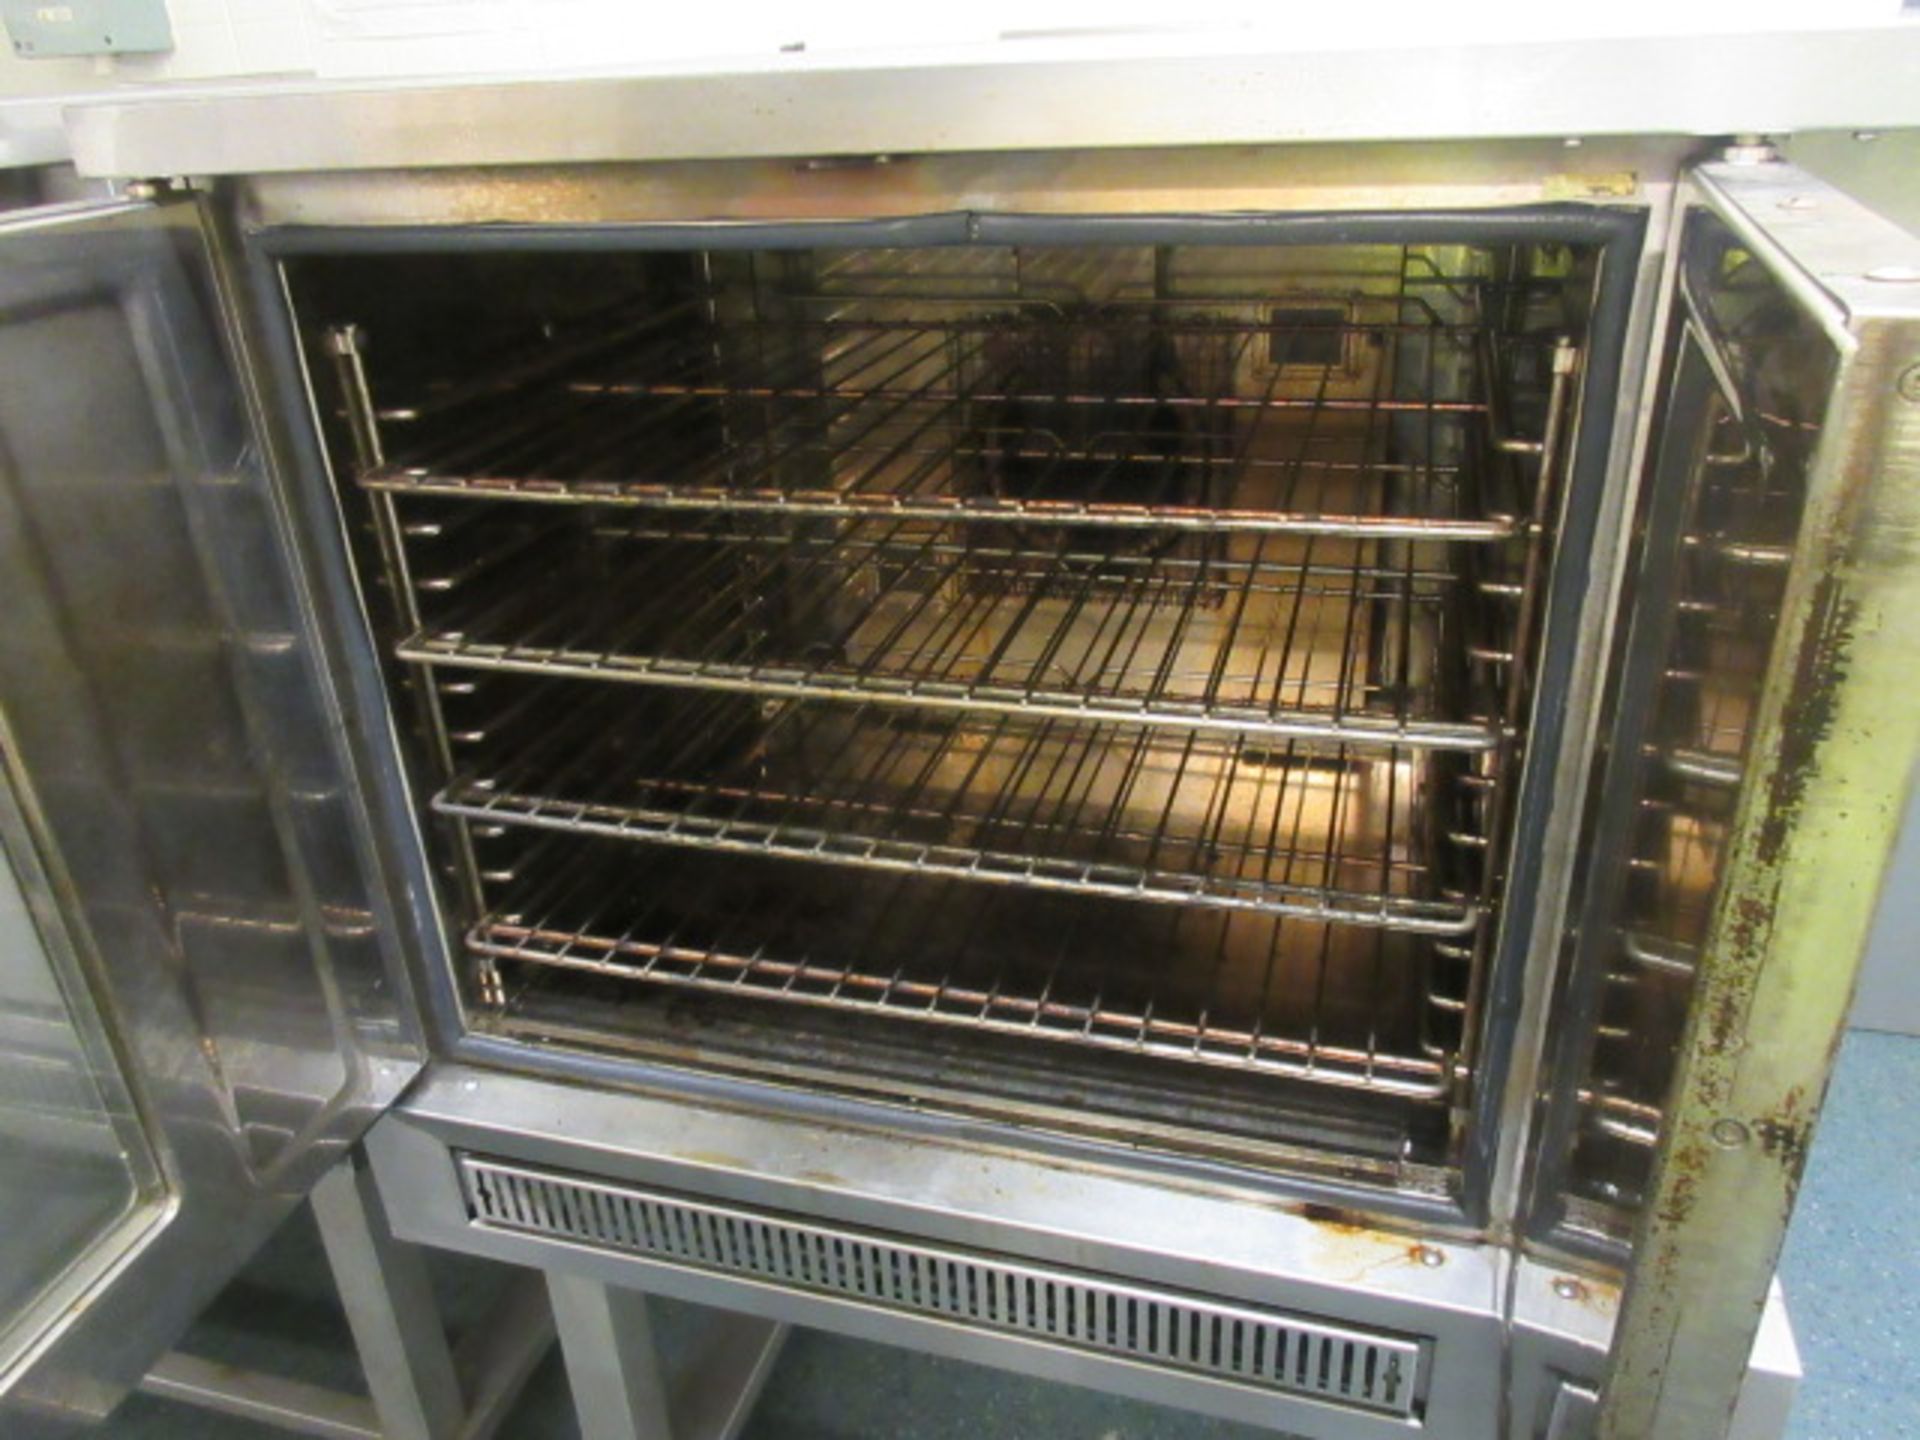 FALCON G7208 GAS HEATED OVEN ON MOBILE BASE 240V SUPPLY - Image 2 of 4